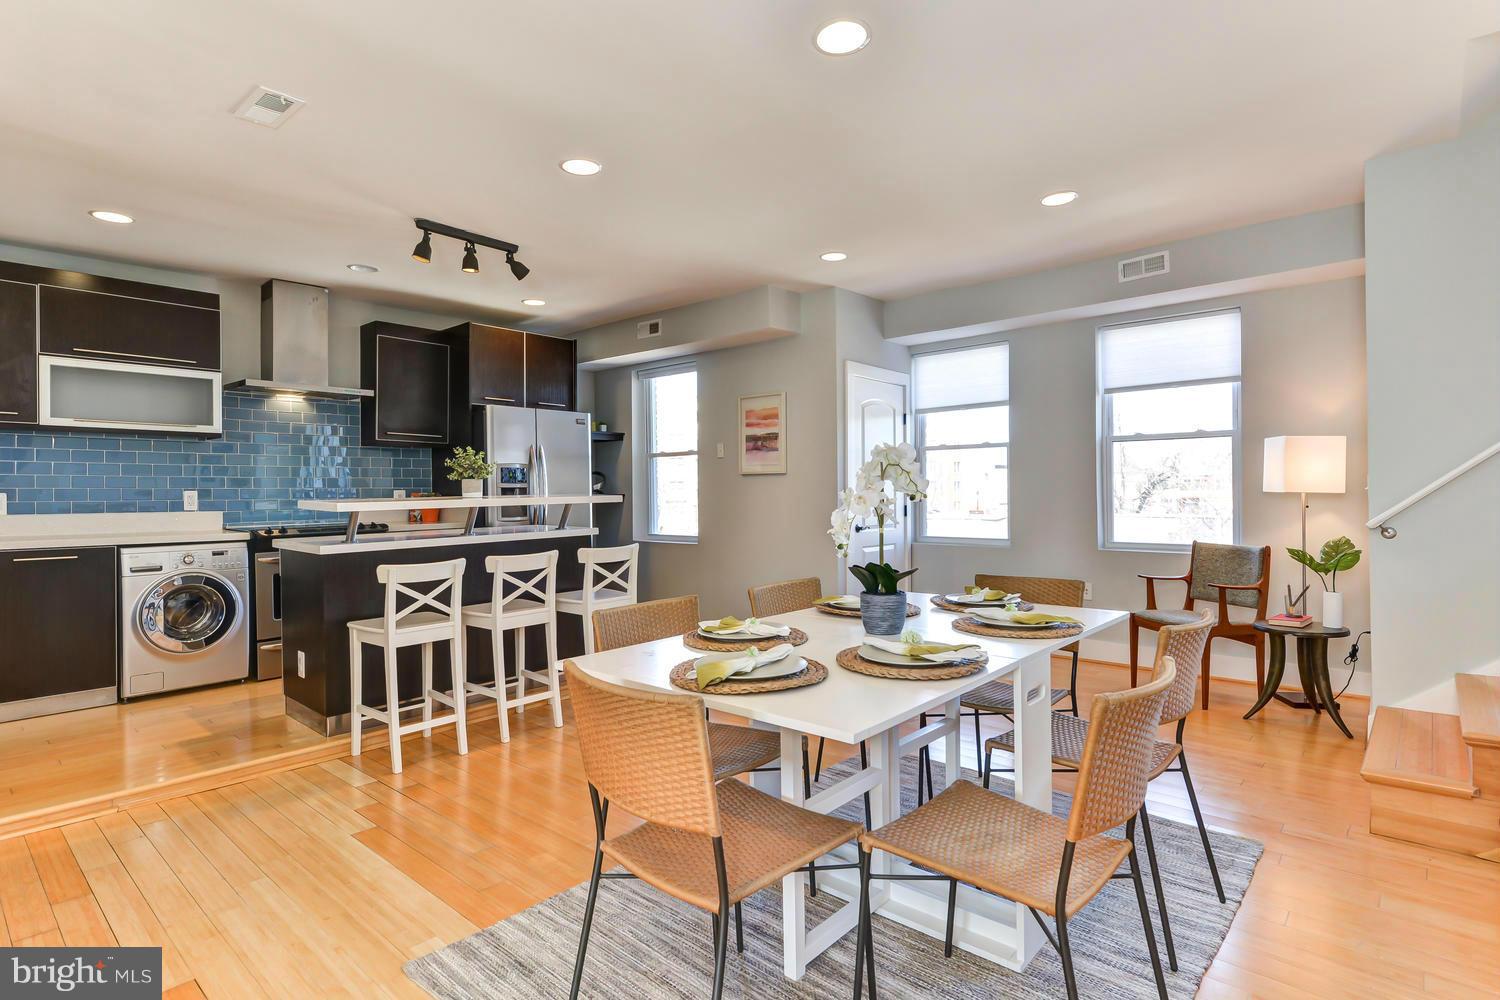 a dining room with stainless steel appliances kitchen island granite countertop a table and chairs